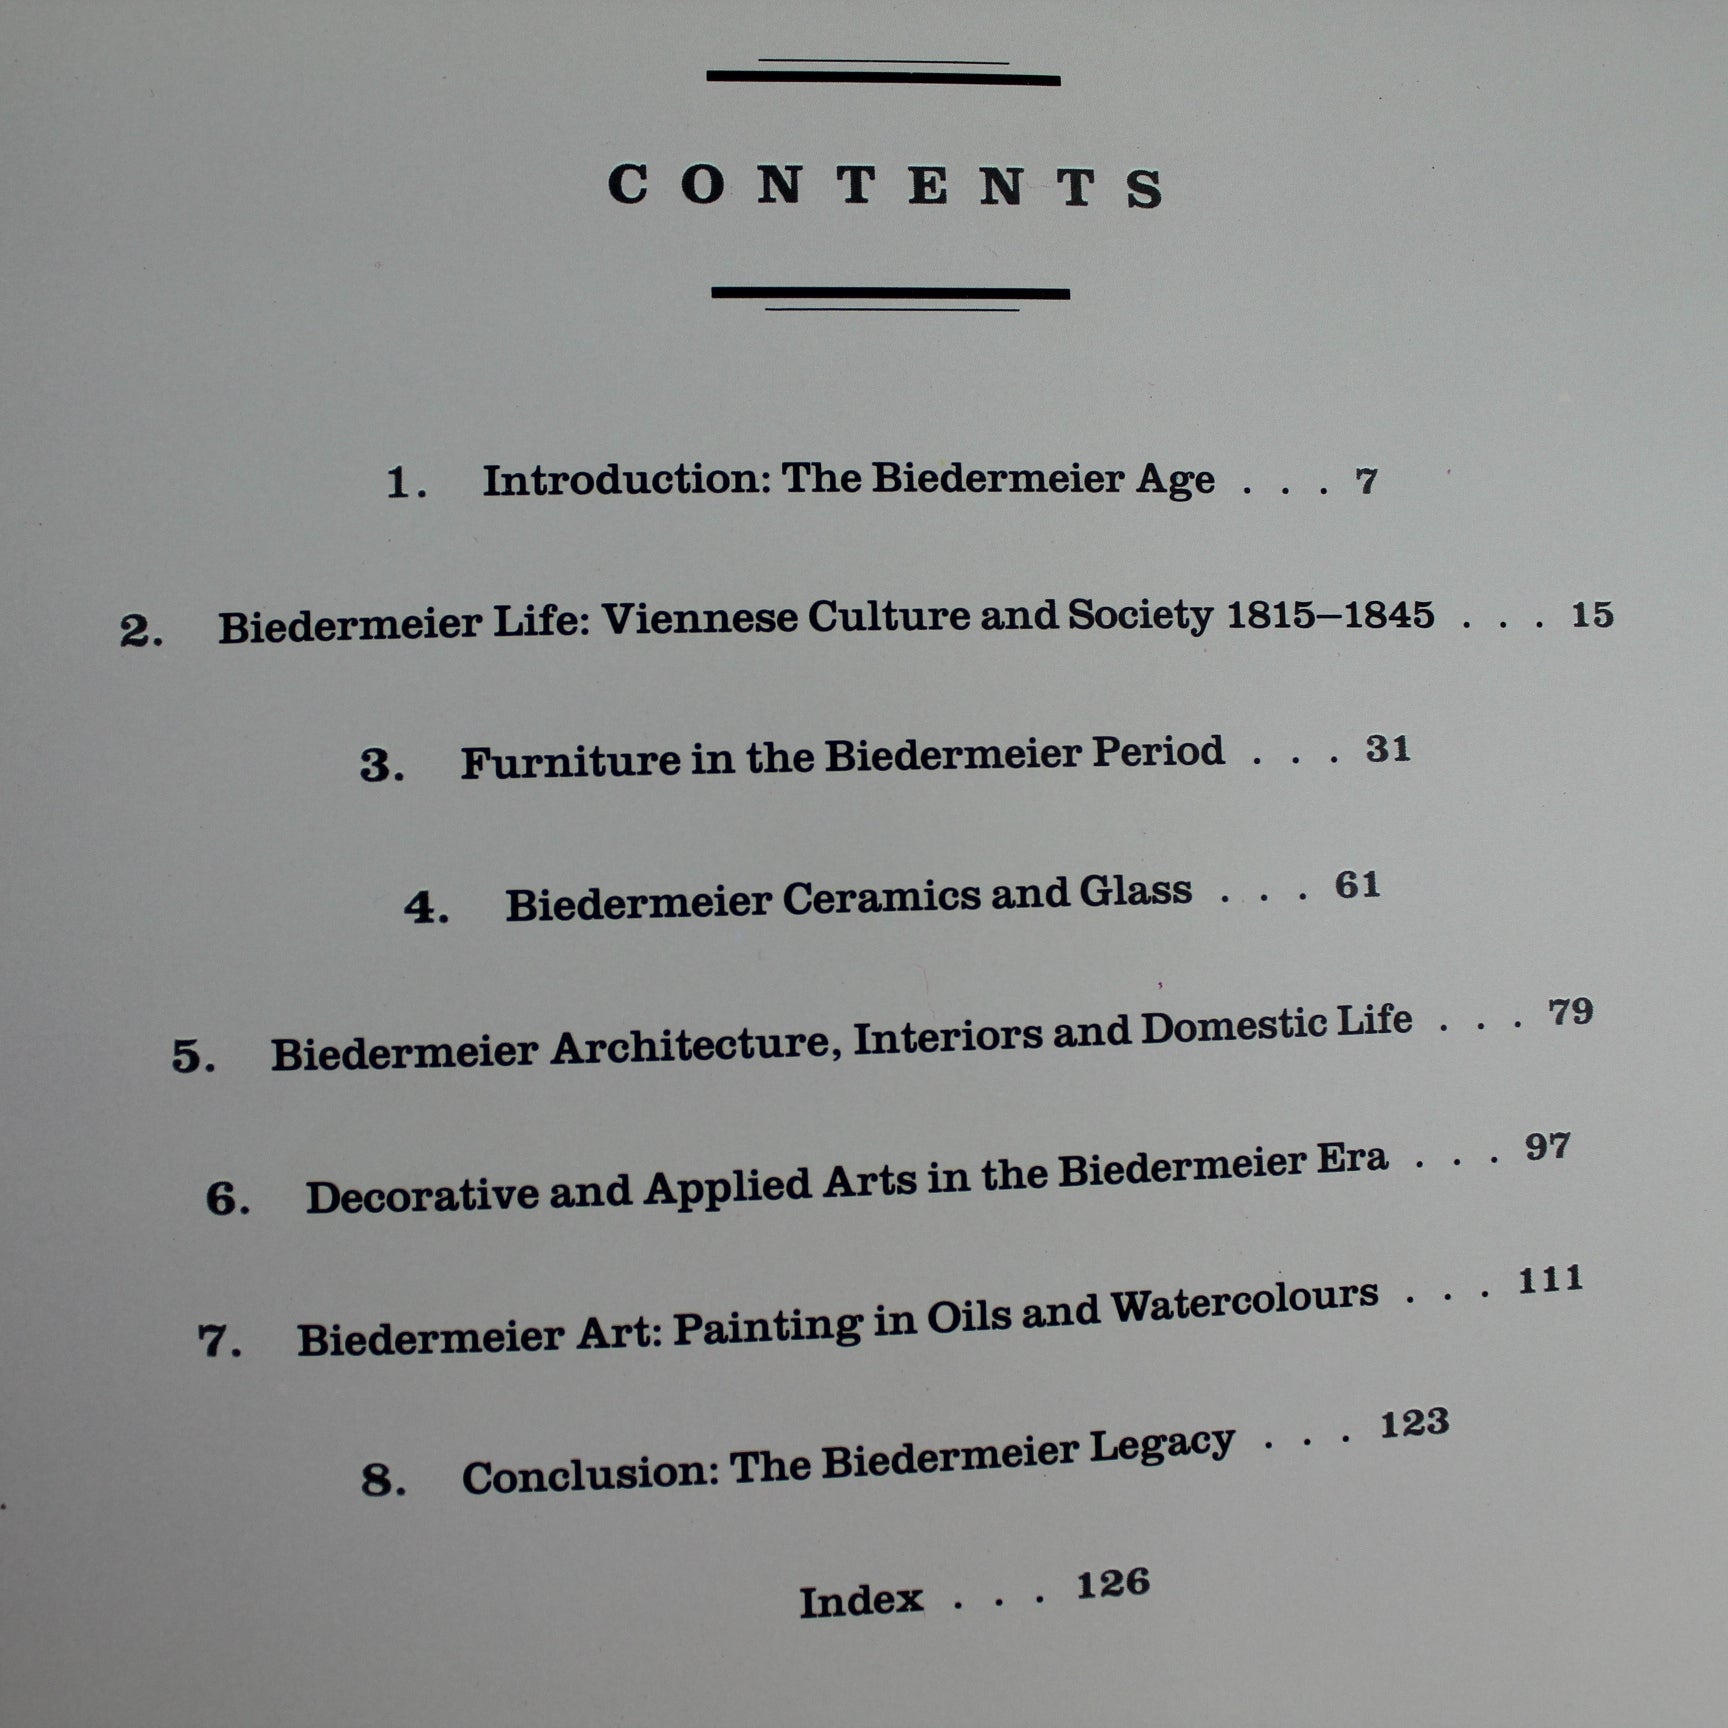 Collection 2 Interior Design Books Biedermeier & Victorian Dom Stone & Jim Kemp good contents, see pages